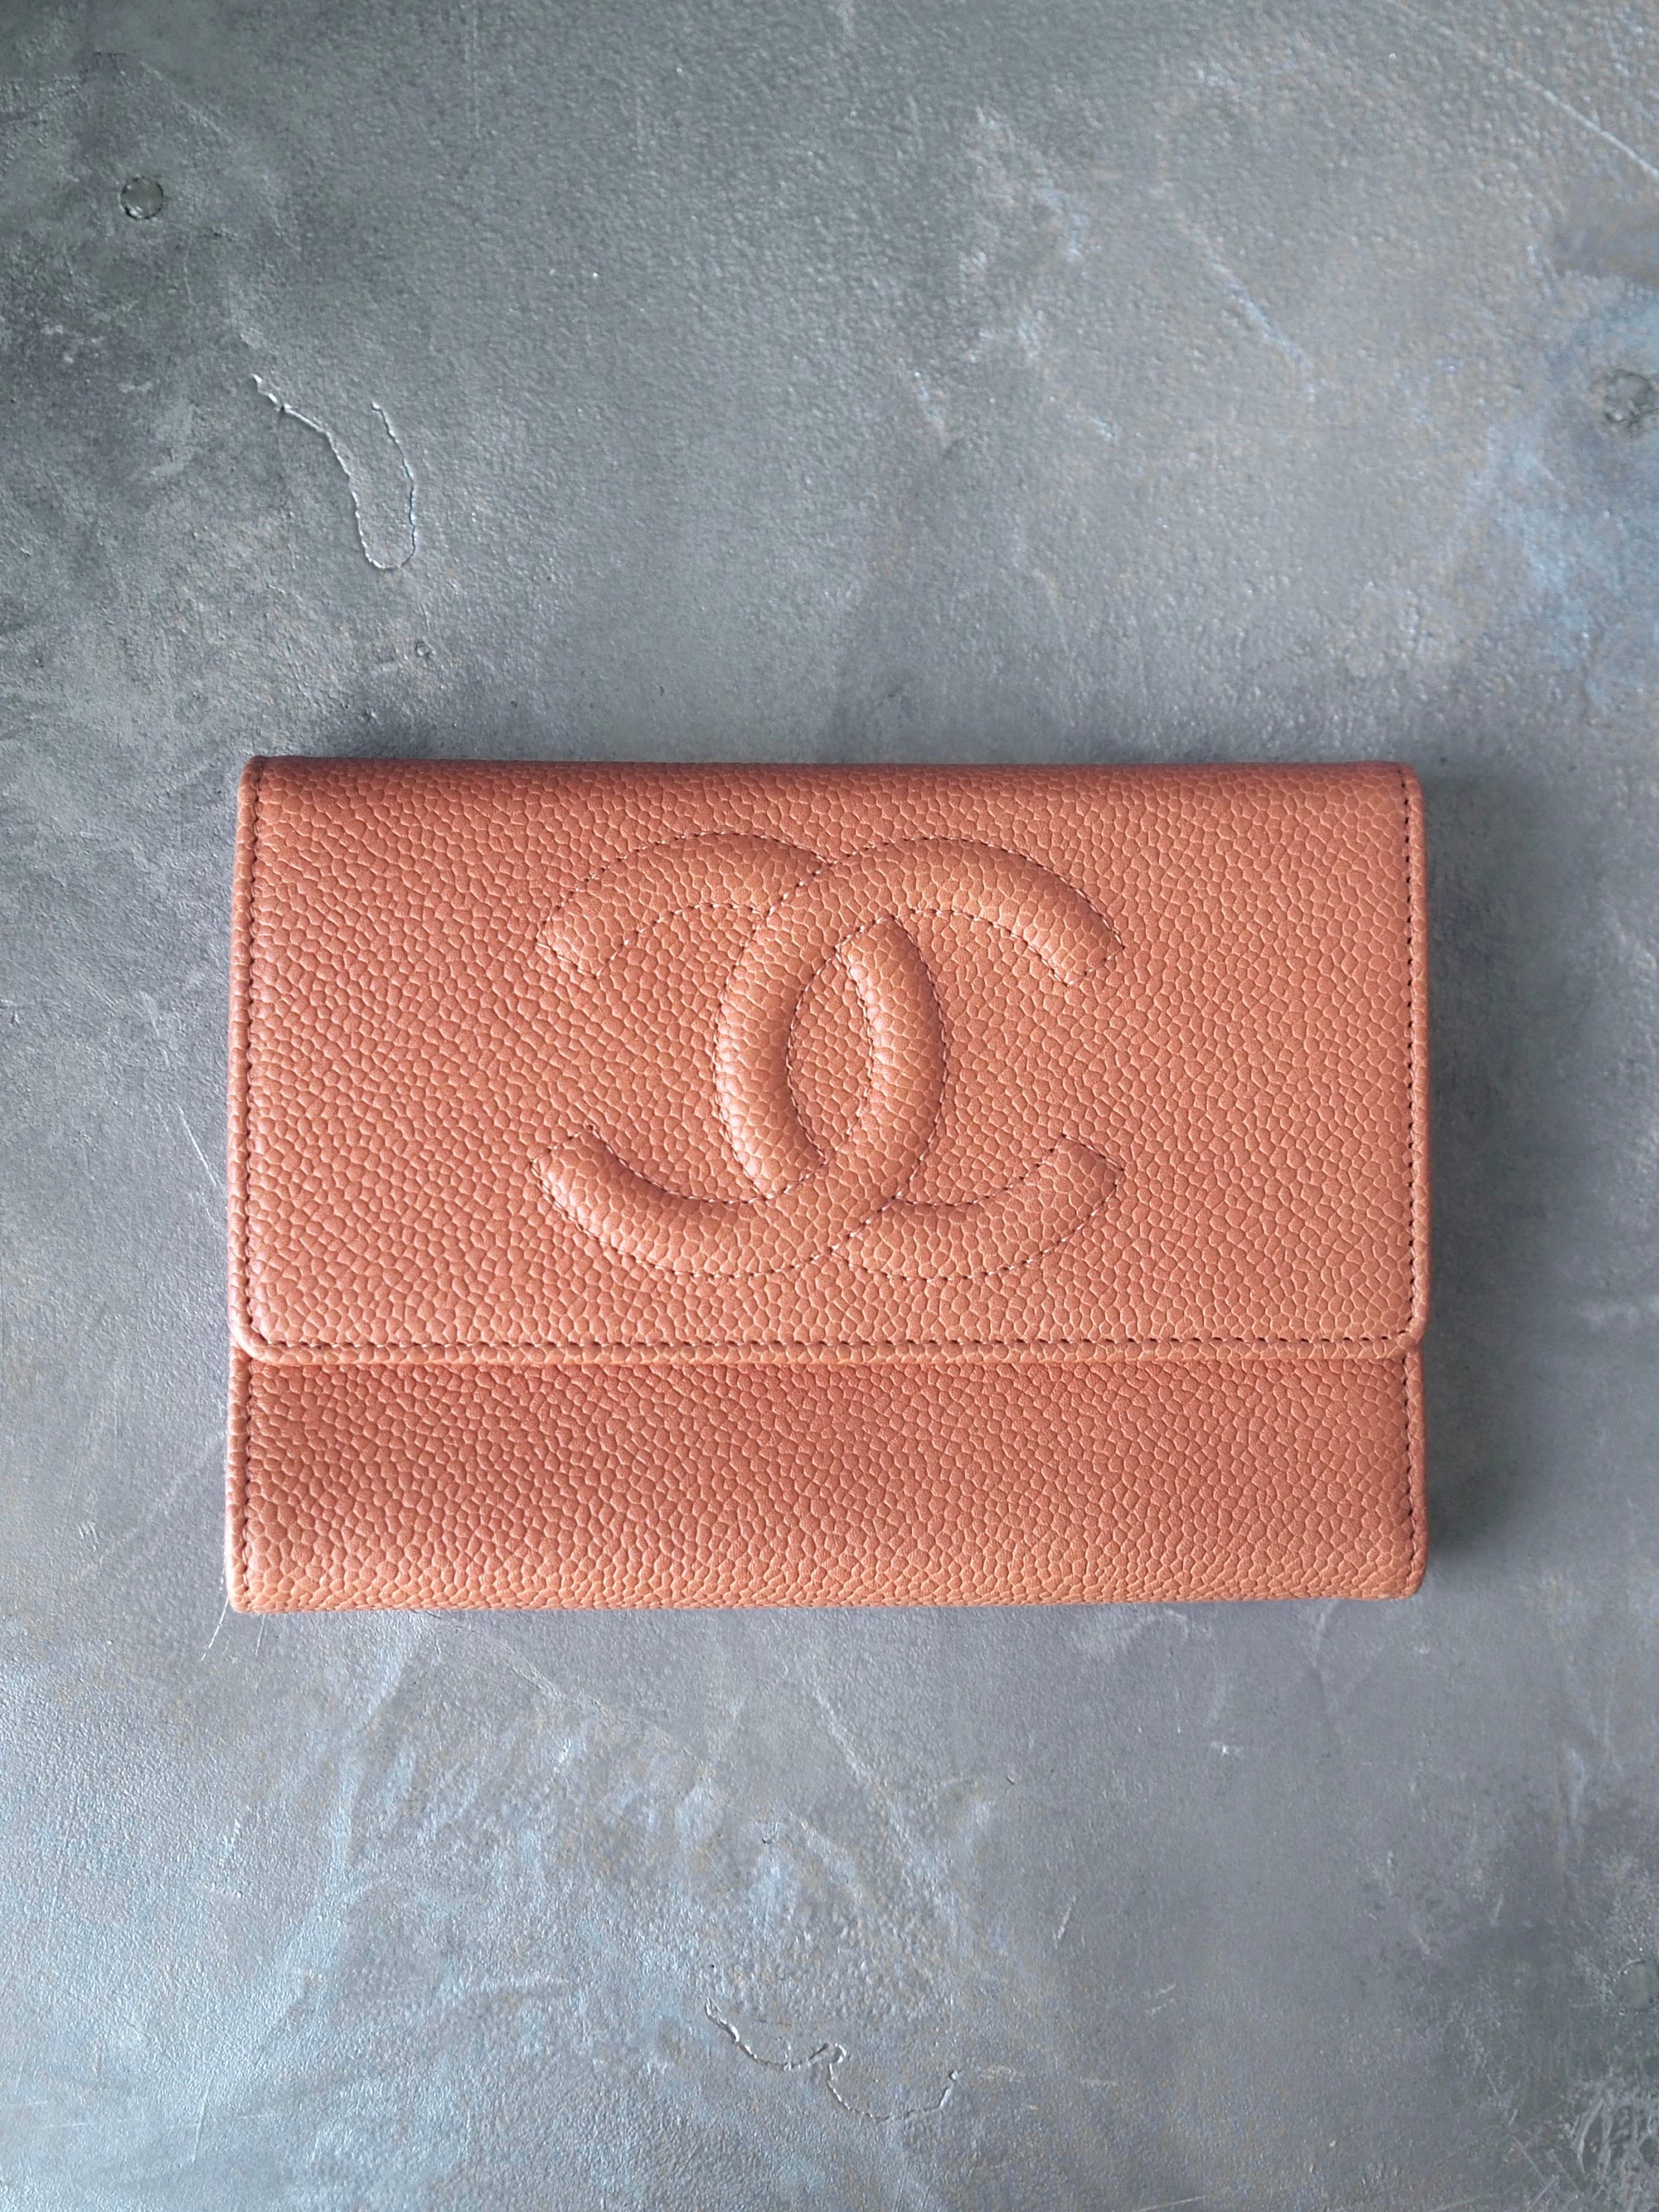 CHANEL COCO Tri-fold Wallet Purse Caviar Skin Leather Pink Authentic Vintage Box